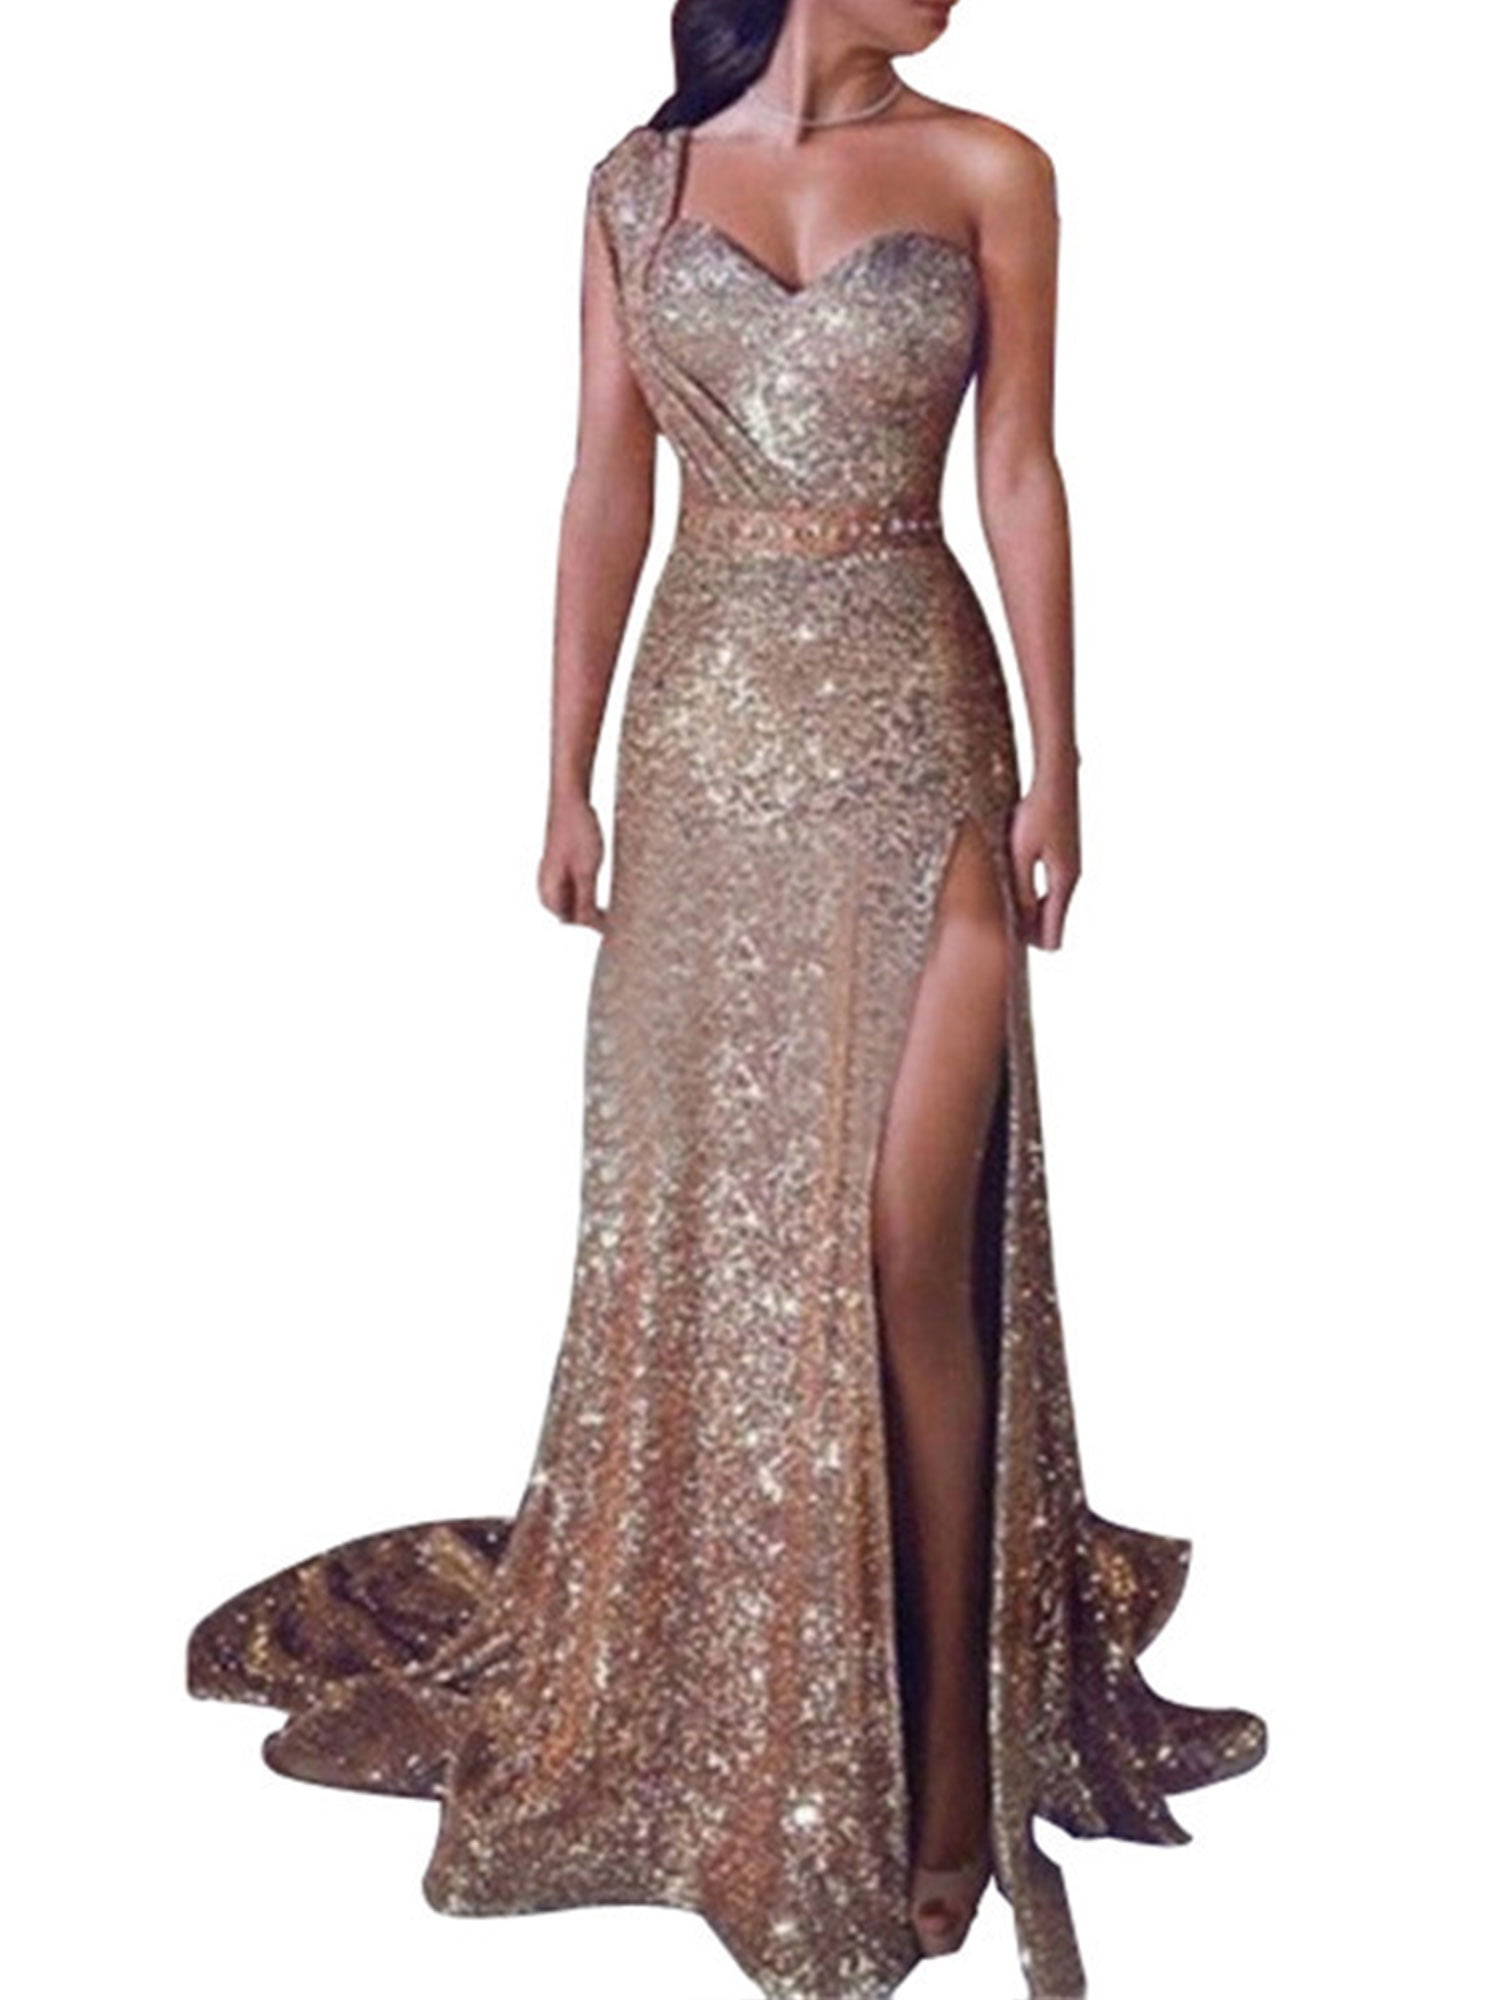 plus size formal dresses rose gold> OFF-63% & Free Shipping!